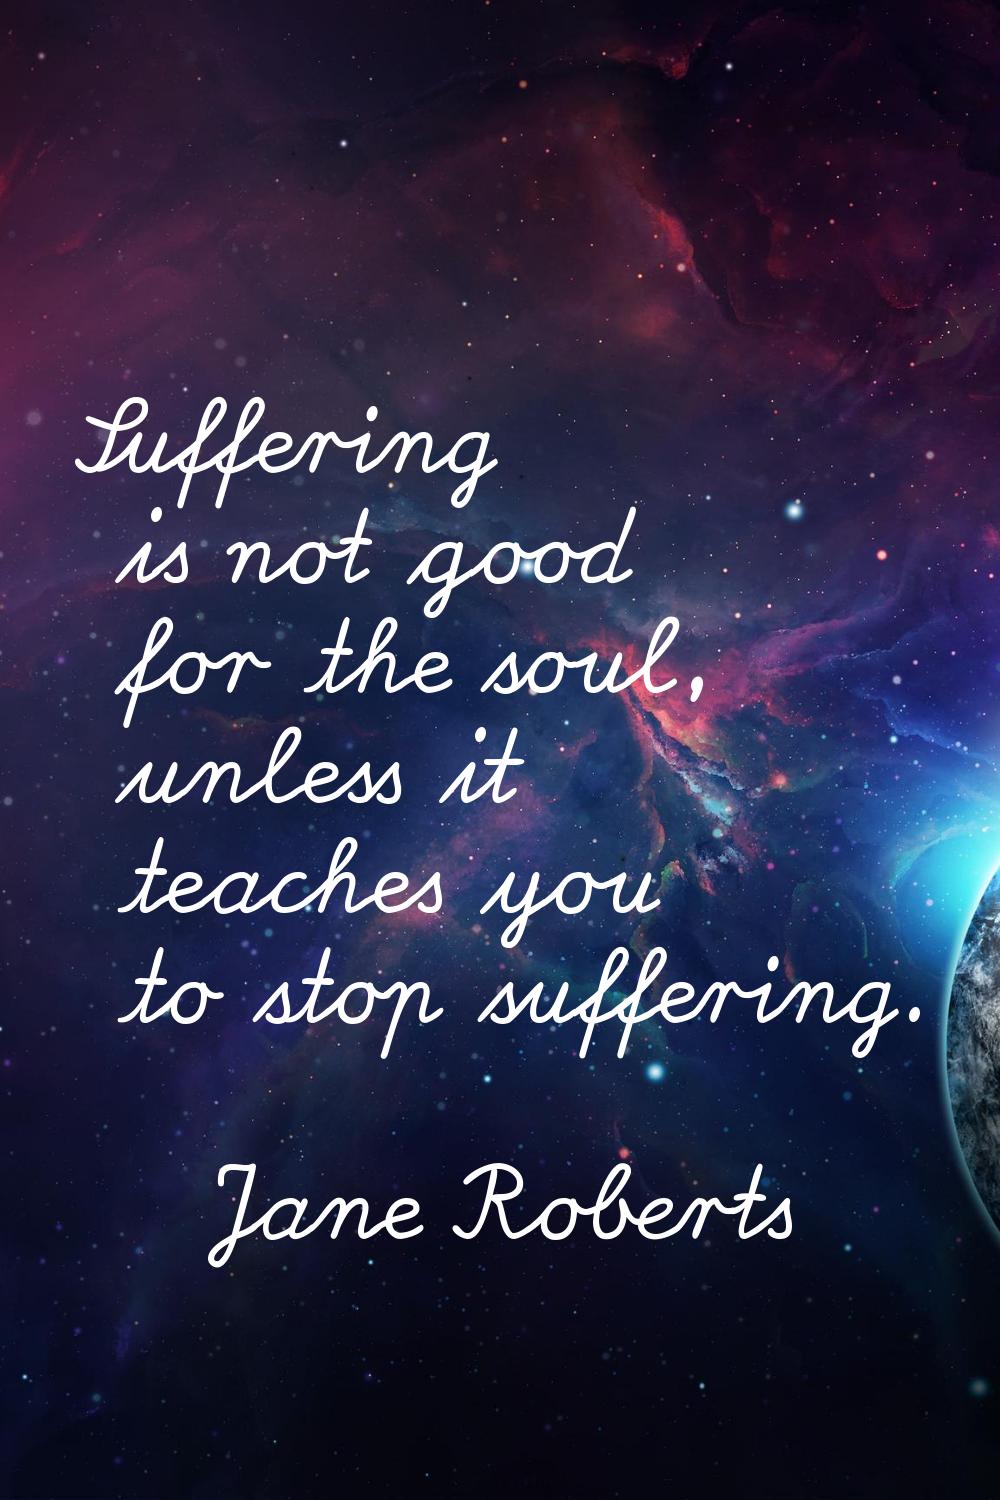 Suffering is not good for the soul, unless it teaches you to stop suffering.